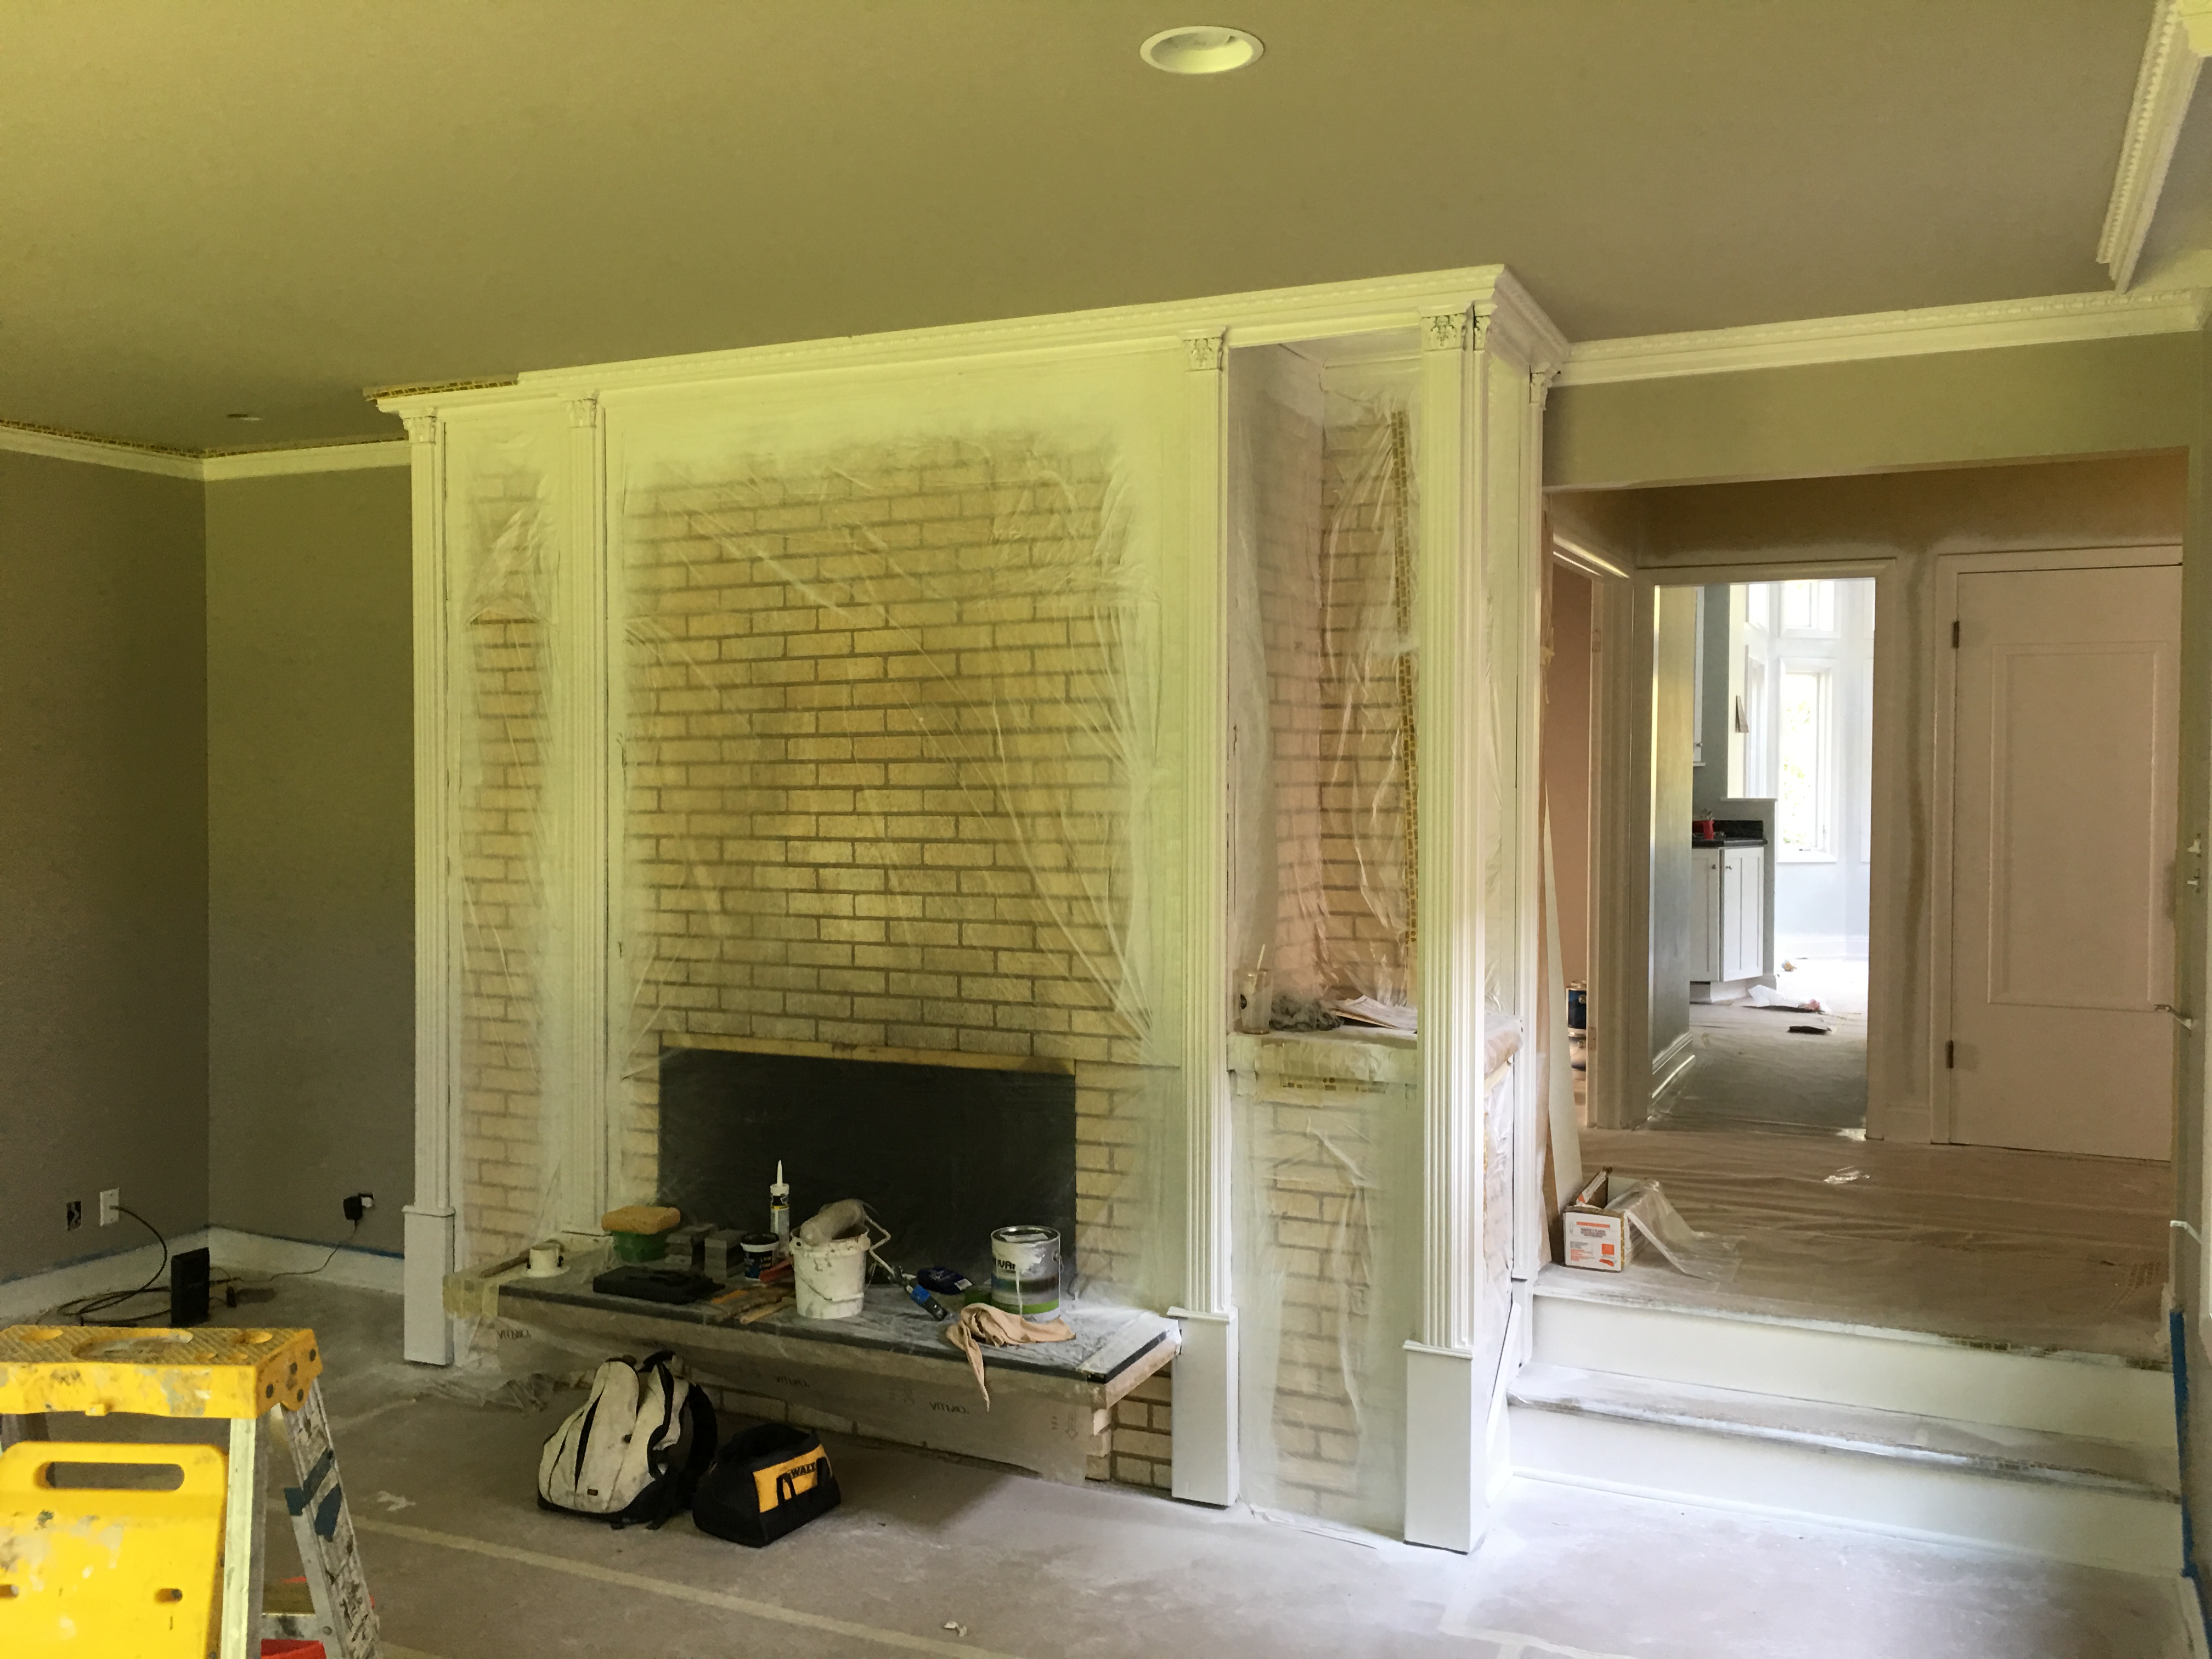 Paint or Whitewashing your fireplace